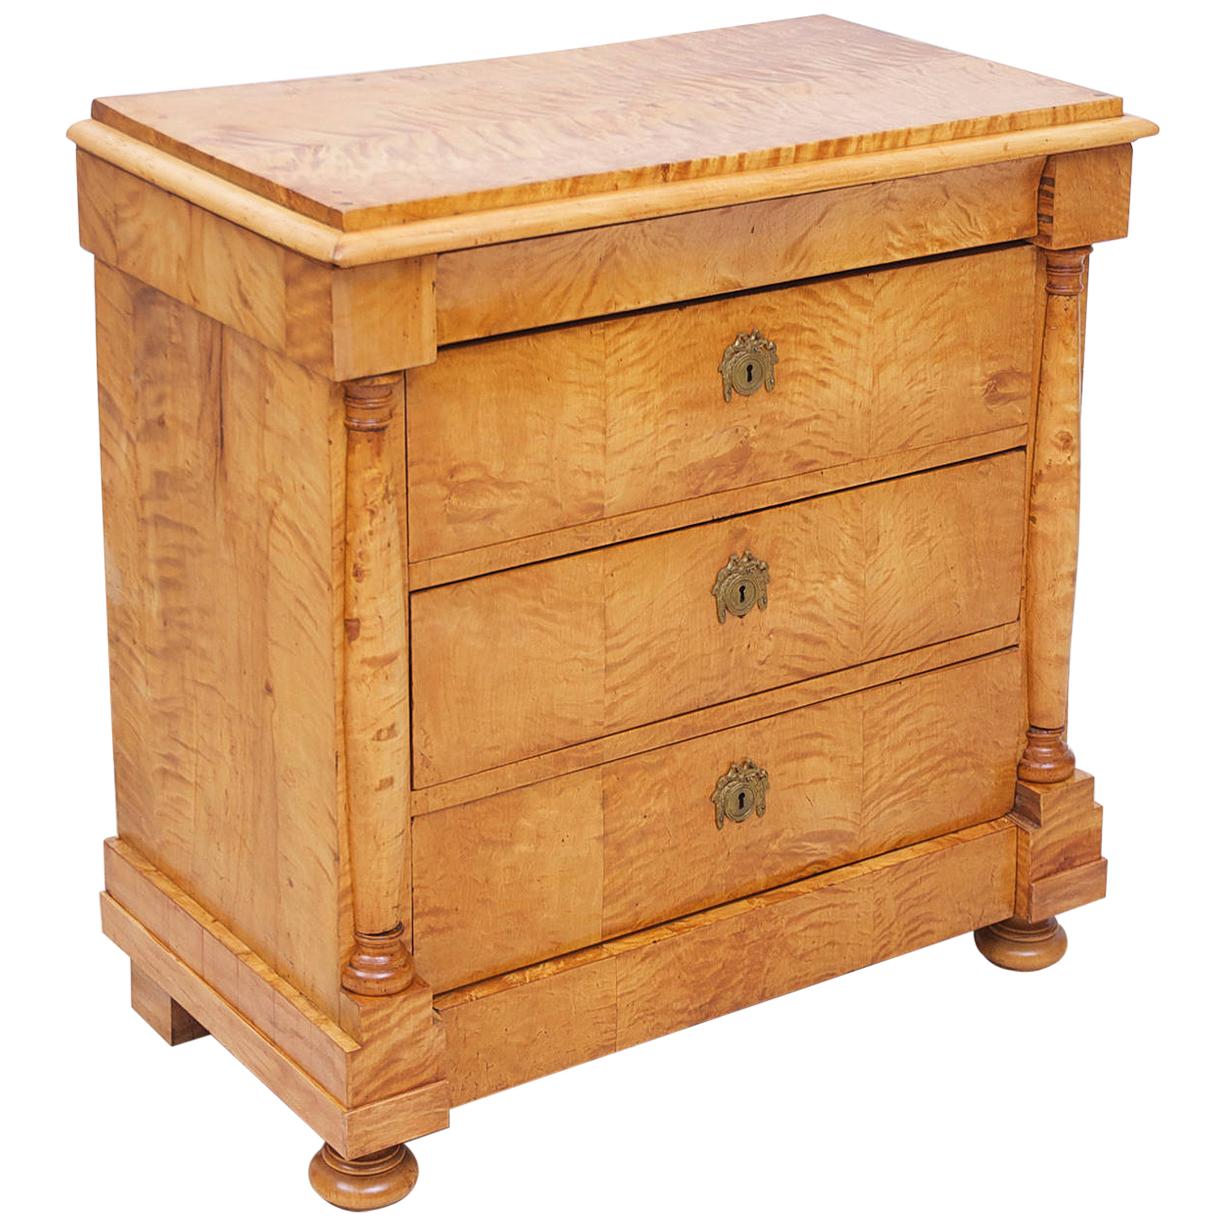 Swedish Biedermeier / Empire Chest of Drawers in Quilted Birch, circa 1820 For Sale